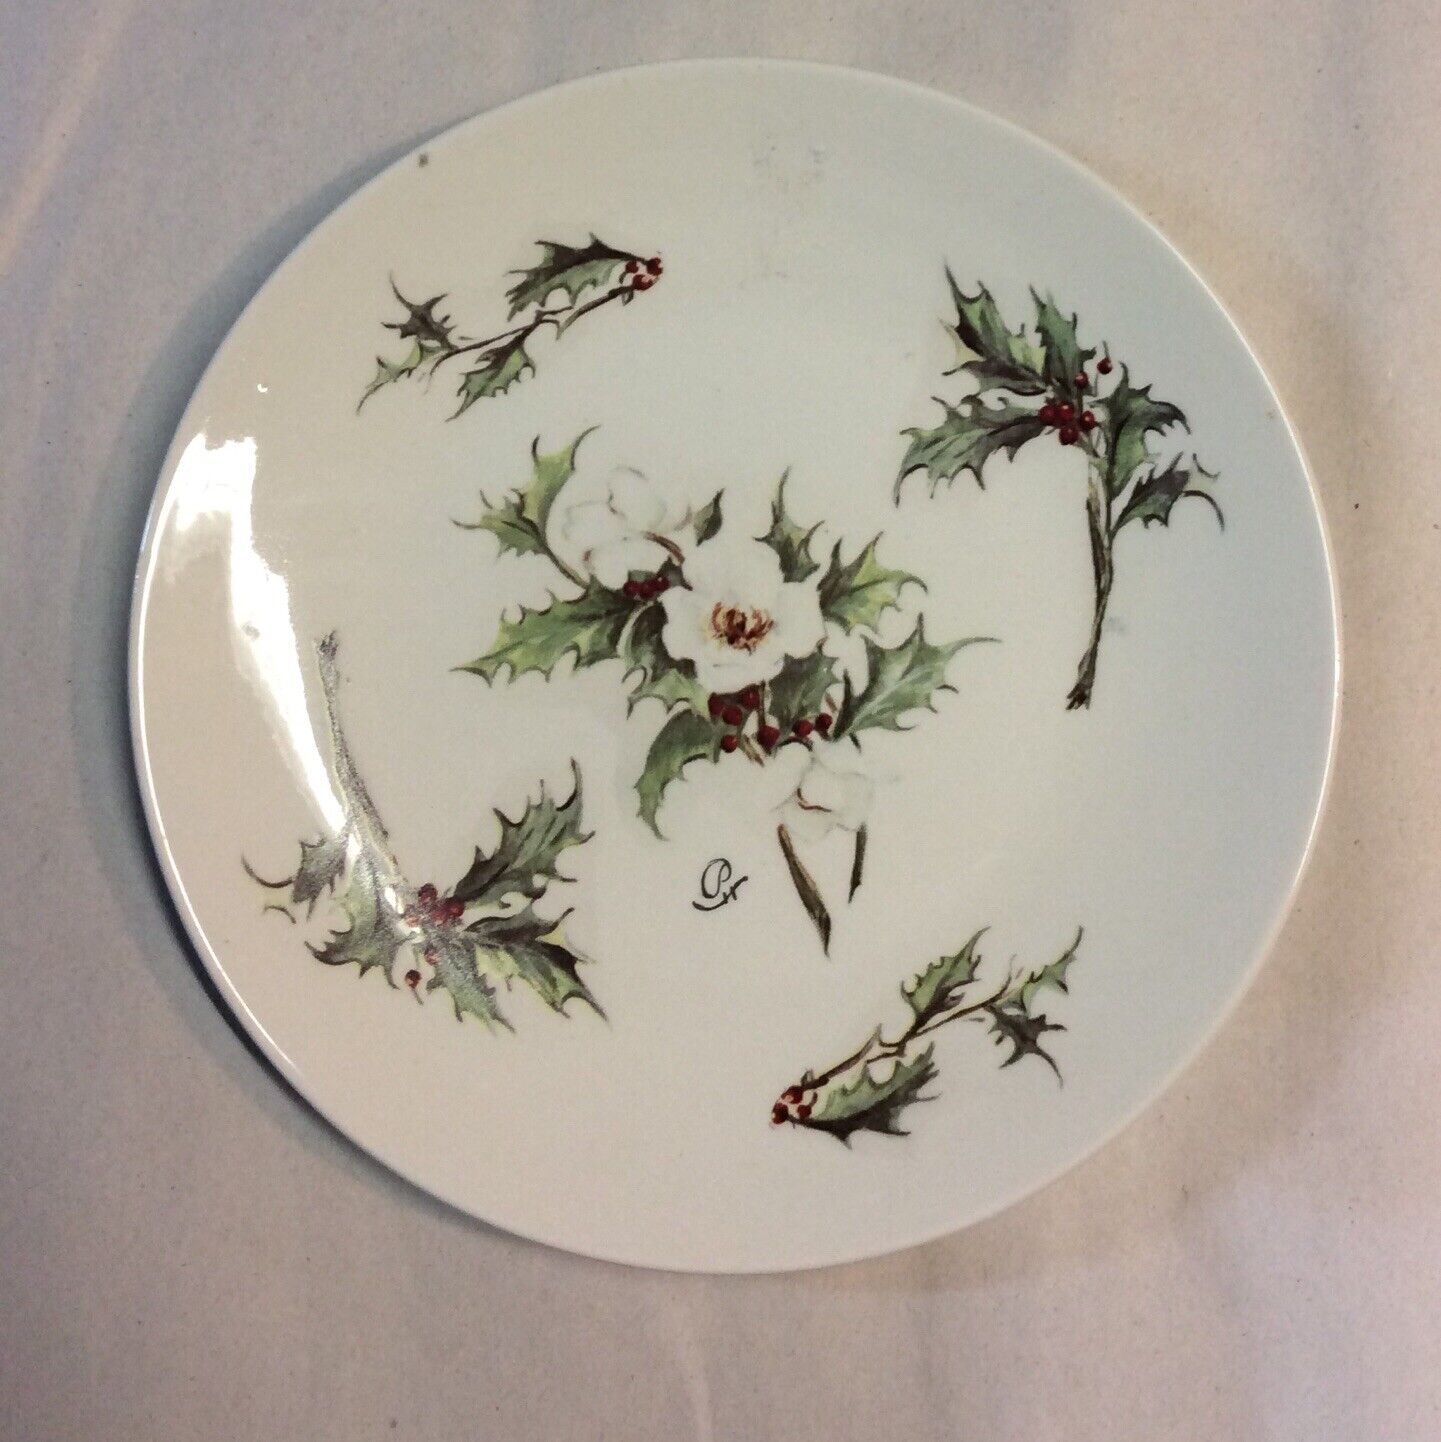 Vintage 1977 L H P Christmas Plate 8.5” Diameter Made In USA. Multicolored